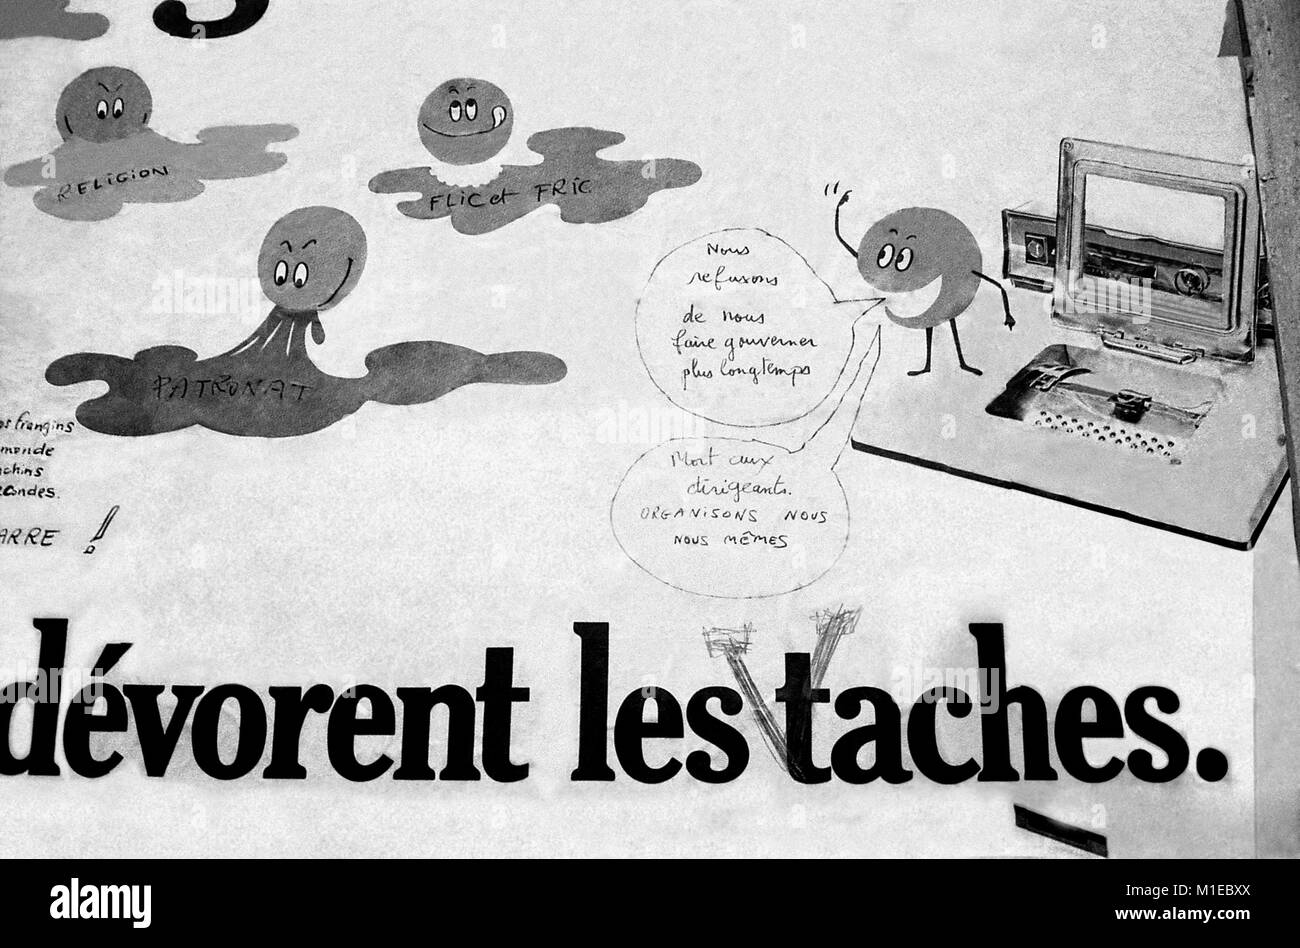 Philippe Gras / Le Pictorium -  Events of may 1968 in FRANCE. -  1968  -  France / Ile-de-France (region) / Paris  -  Events of 1968 in FRANCE. -  'Be young and shut up!', 'It's only the beginning of the struggle!', 'Burst of enthousiasm for a long war!' : that's some examples of the solgans and revendications made by the Working Class and the Students. Stock Photo